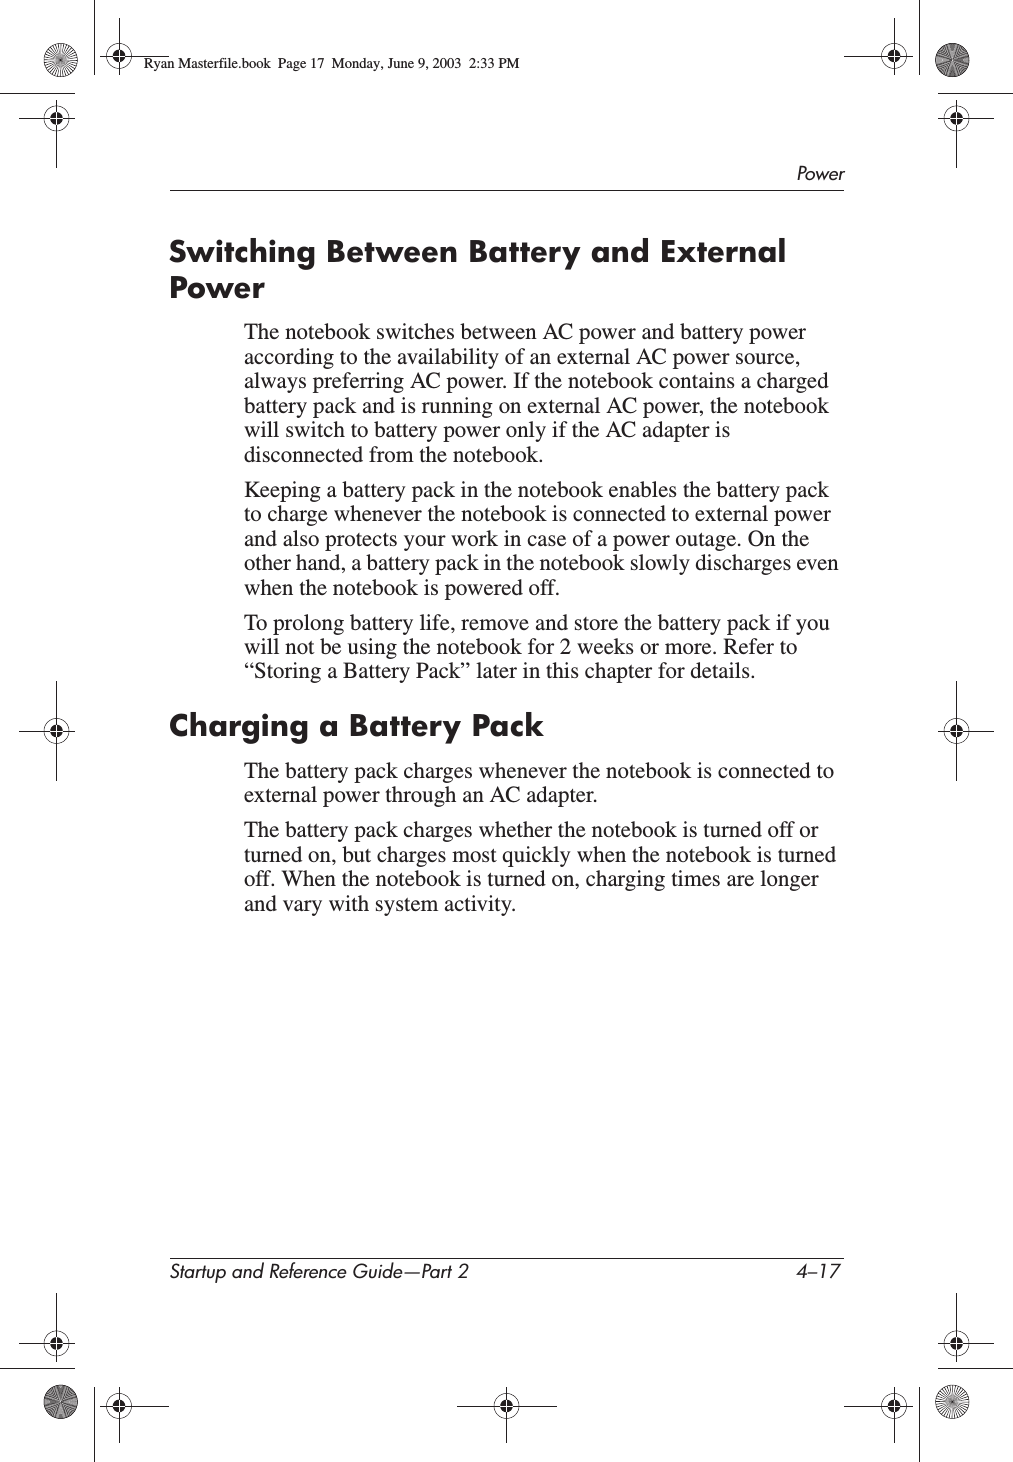 PowerStartup and Reference Guide—Part 2 4–17Switching Between Battery and External PowerThe notebook switches between AC power and battery power according to the availability of an external AC power source, always preferring AC power. If the notebook contains a charged battery pack and is running on external AC power, the notebook will switch to battery power only if the AC adapter is disconnected from the notebook.Keeping a battery pack in the notebook enables the battery pack to charge whenever the notebook is connected to external power and also protects your work in case of a power outage. On the other hand, a battery pack in the notebook slowly discharges even when the notebook is powered off. To prolong battery life, remove and store the battery pack if you will not be using the notebook for 2 weeks or more. Refer to “Storing a Battery Pack” later in this chapter for details.Charging a Battery PackThe battery pack charges whenever the notebook is connected to external power through an AC adapter.The battery pack charges whether the notebook is turned off or turned on, but charges most quickly when the notebook is turned off. When the notebook is turned on, charging times are longer and vary with system activity.Ryan Masterfile.book  Page 17  Monday, June 9, 2003  2:33 PM